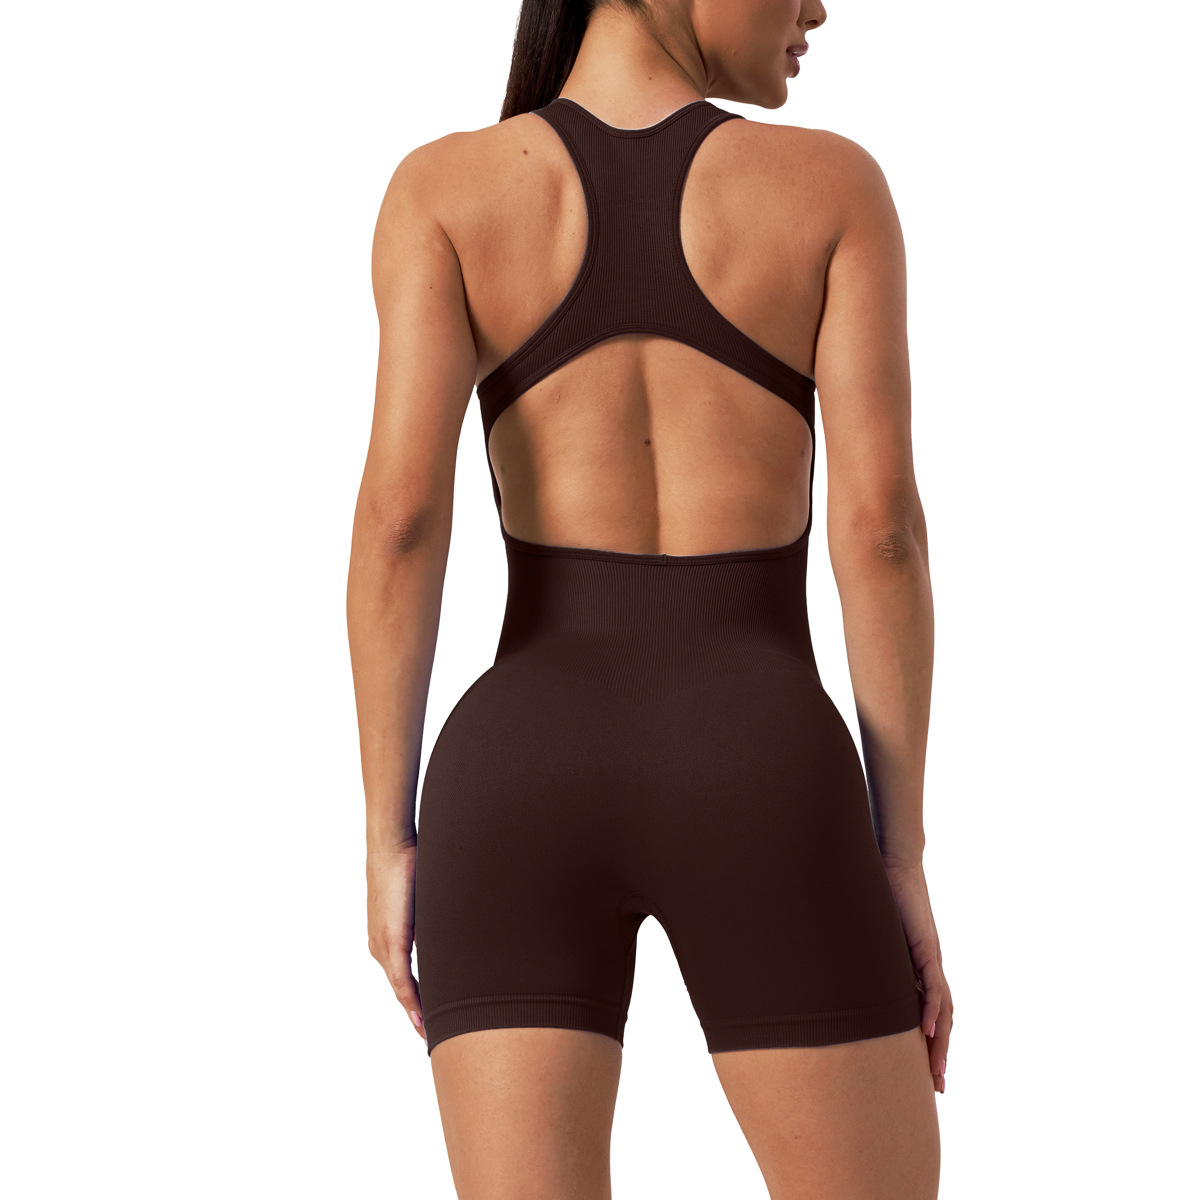 G9616--Seamless one-piece yoga wear, women's one-piece shorts, fitness yoga, beautiful back and butt lift